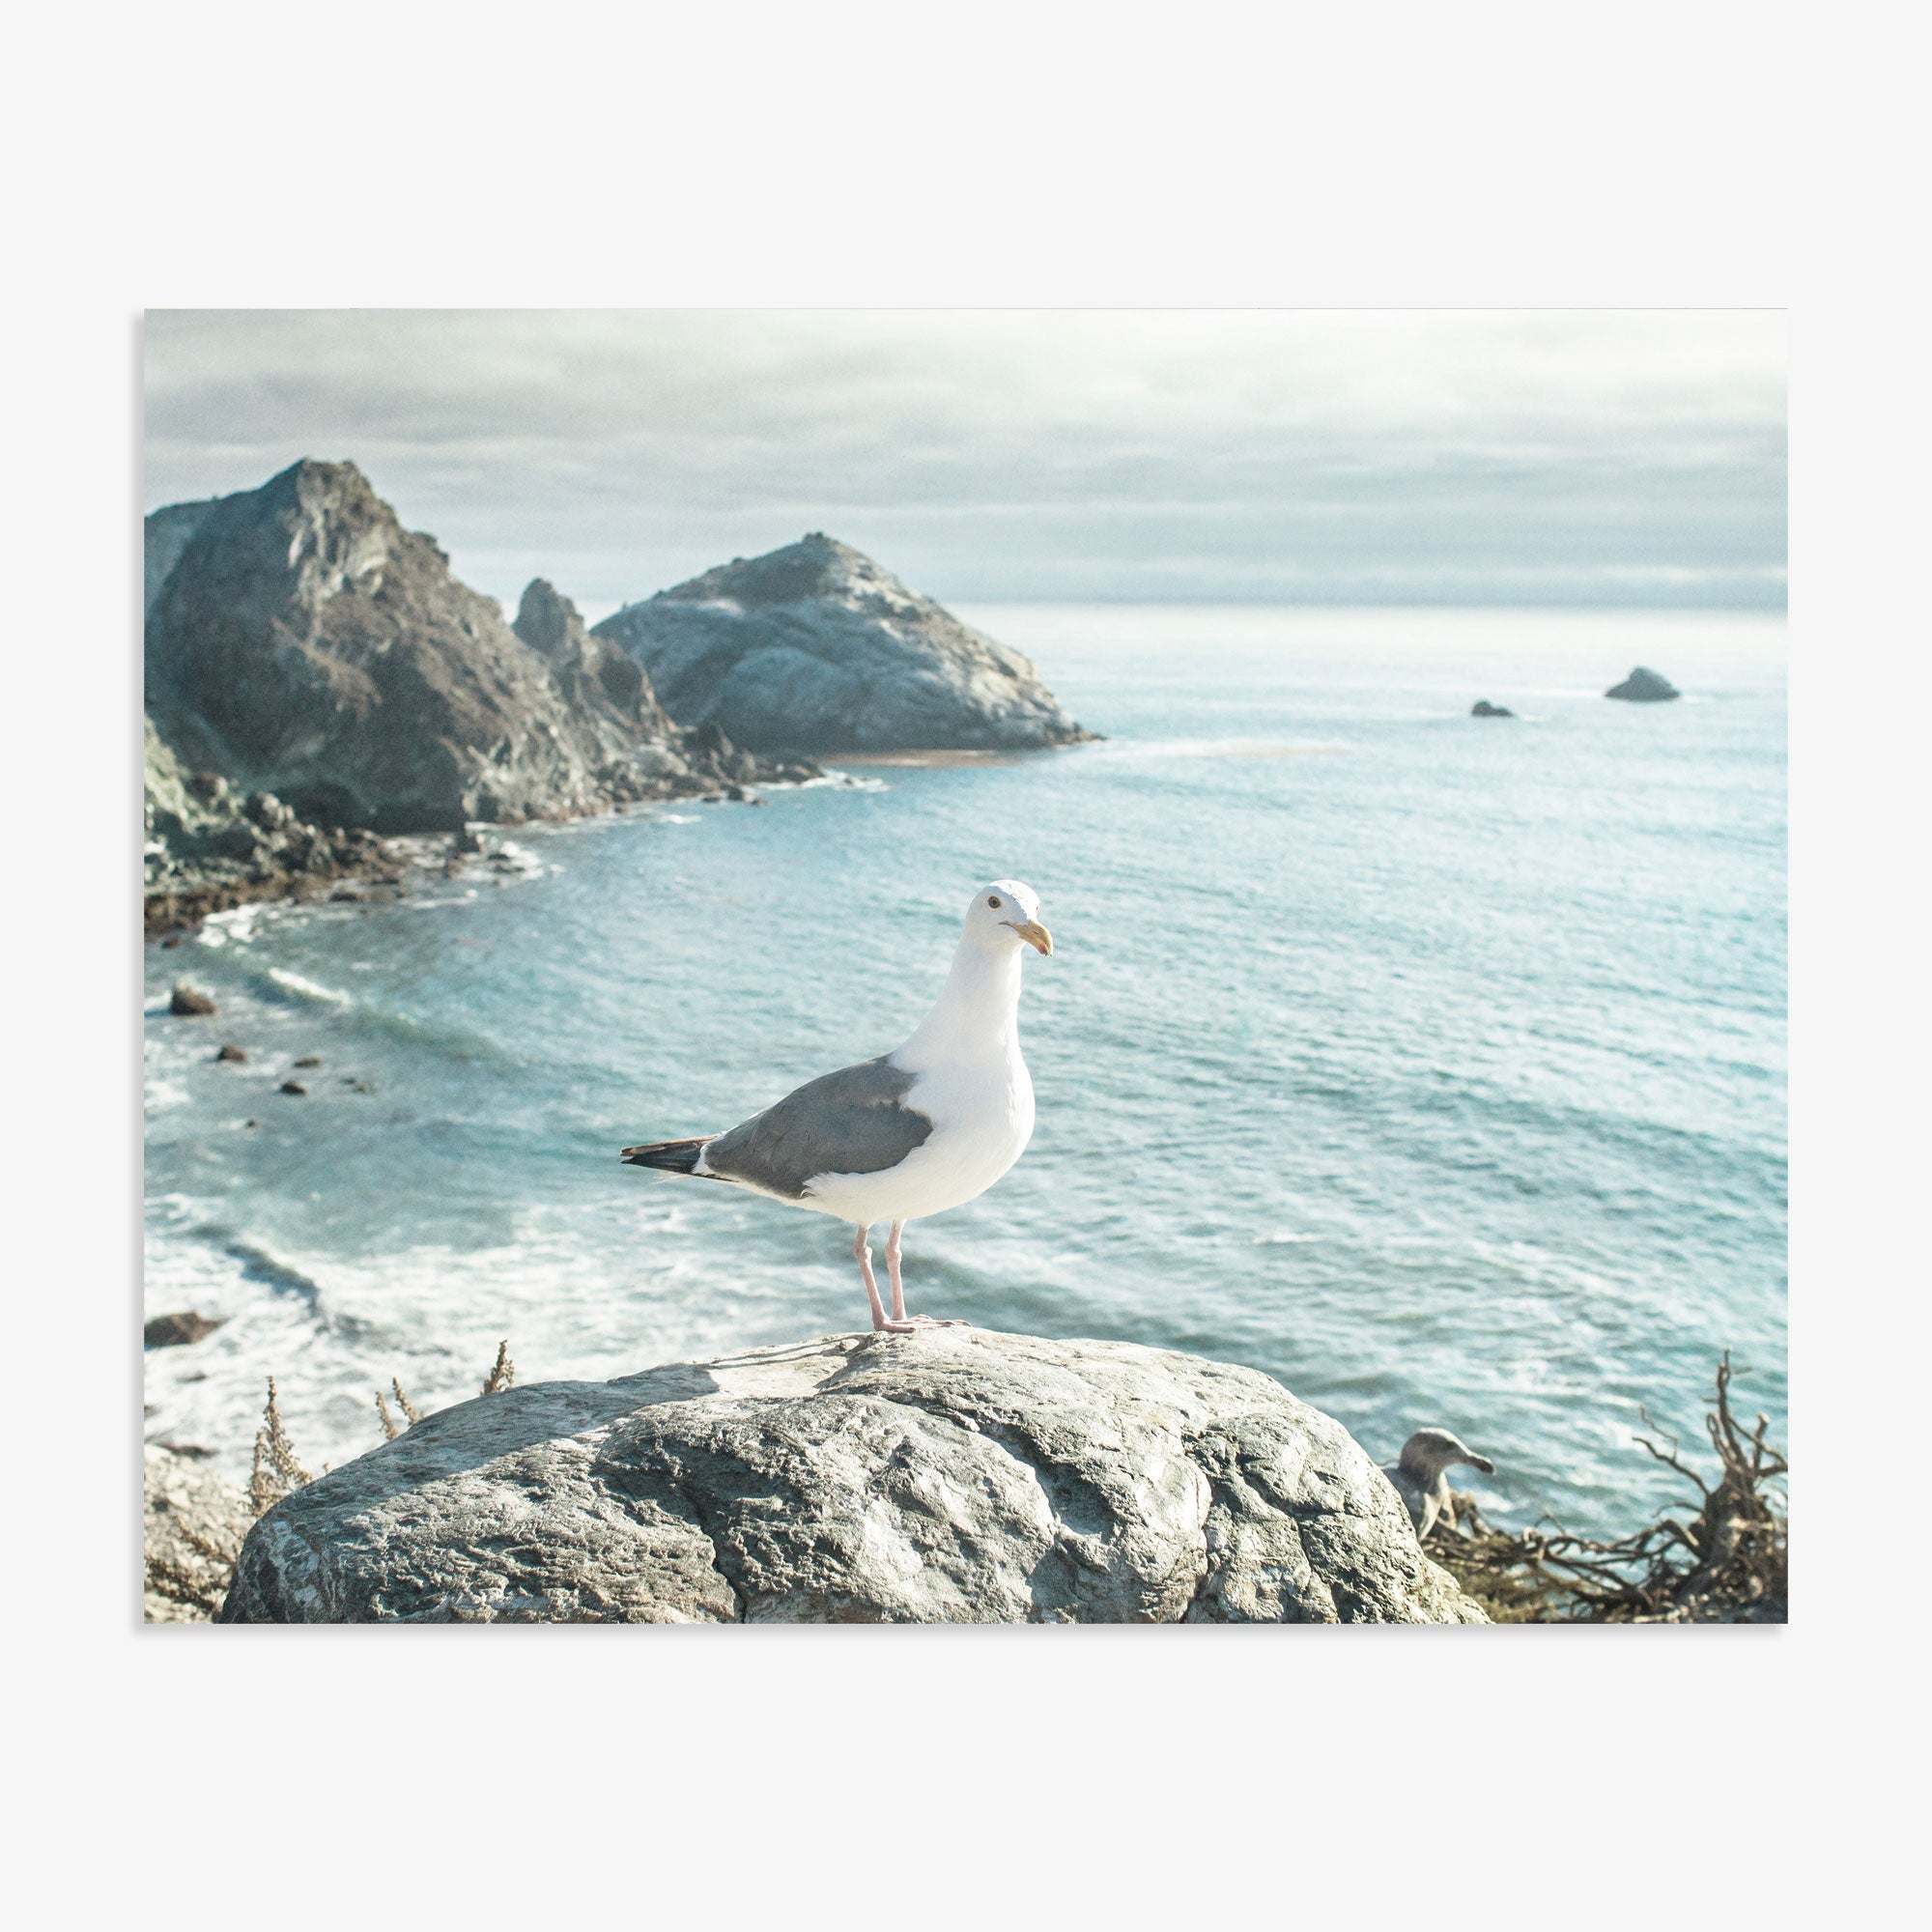 Photo of a seagull perched on a rock in front of a scenic coastline with rugged cliffs and calm sea waters, printed on archival photographic paper, hung on a line with clothespins. Offley Green's Big Sur Landscape Print, 'Lobster Mornay For Tea'.